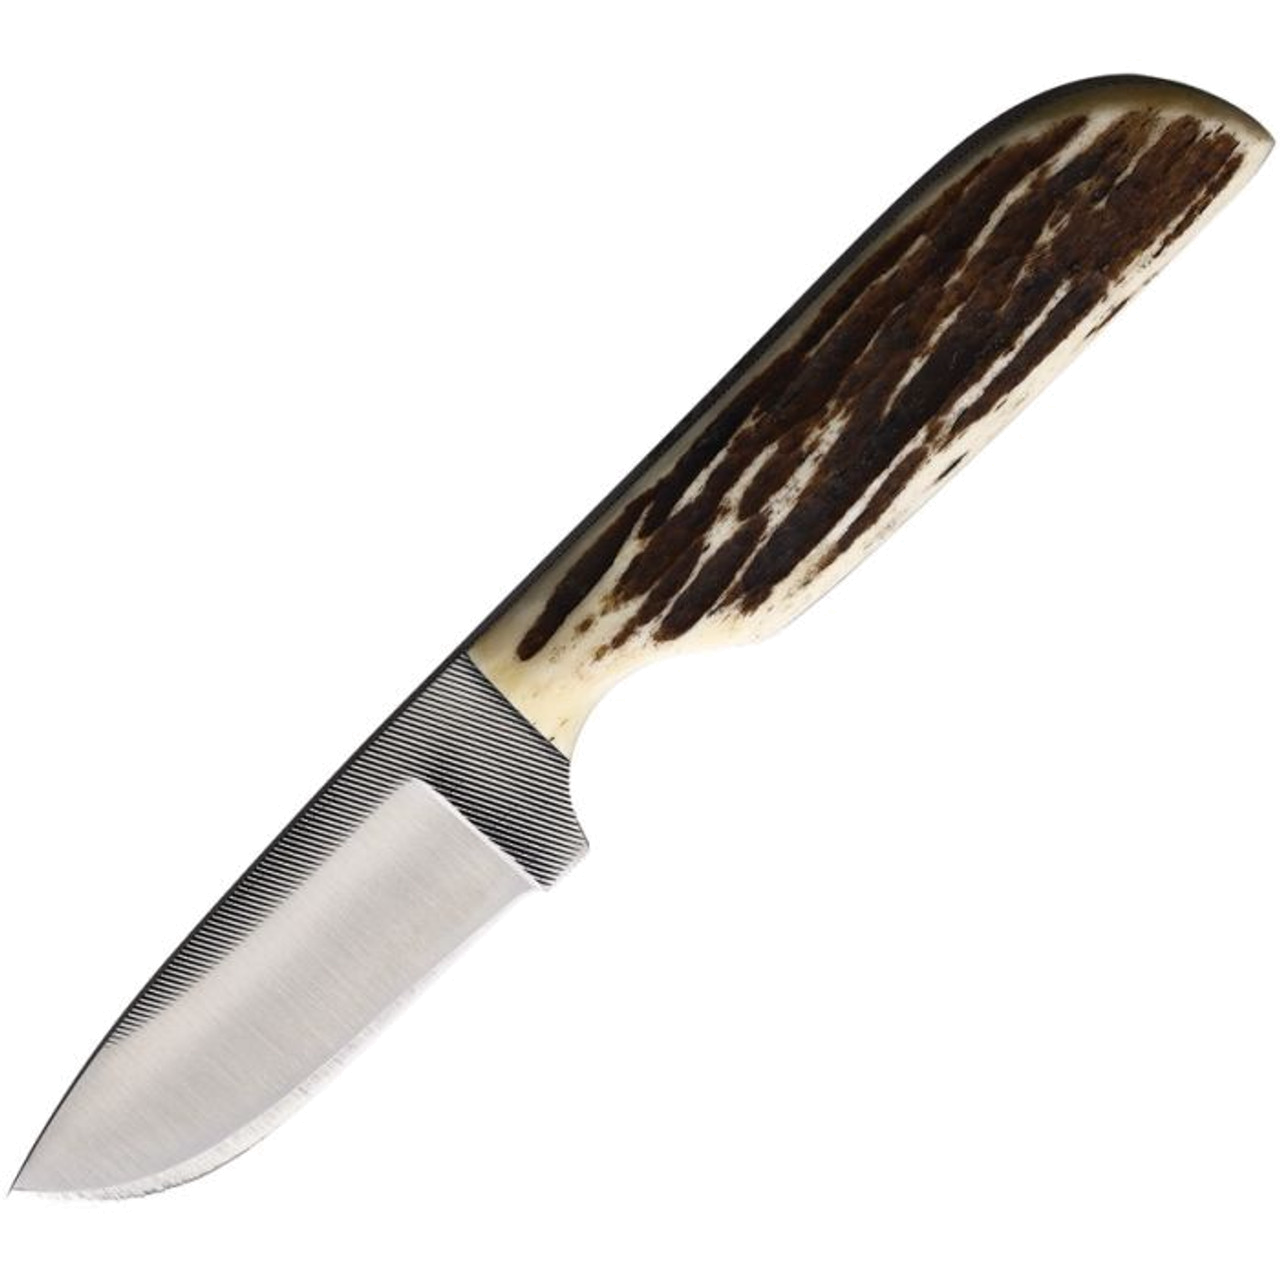 product image for Anza AZWKR6LJB Fixed Blade Knife 2.63" Carbon Steel with LJ Bone Handle